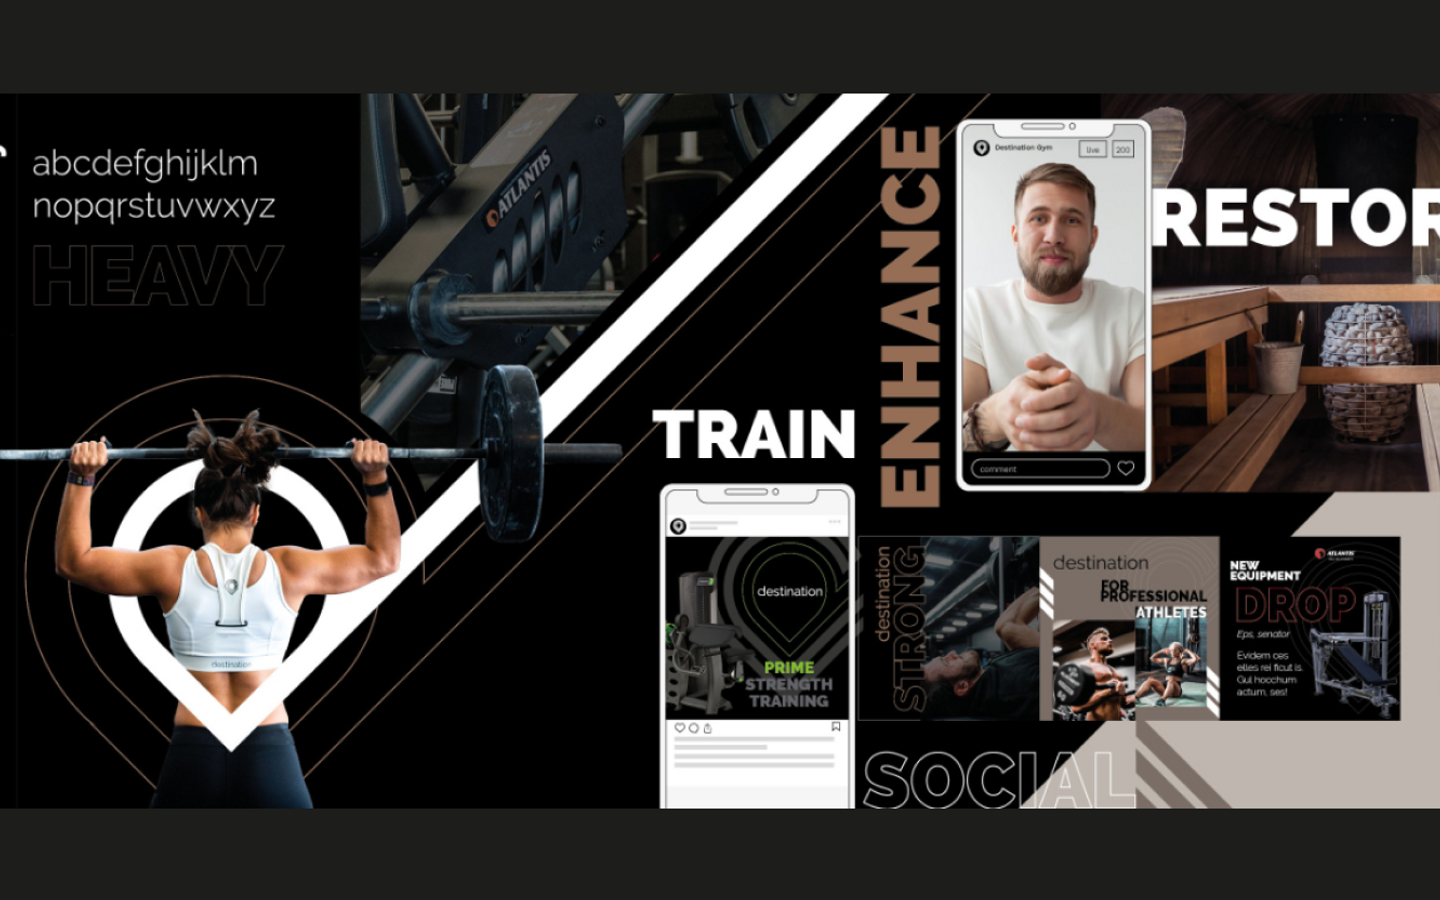 Destination Gym visual identity showcasing 'Raleway' font, a woman weightlifting, a man in a sauna and digital app integration with motivational slogans 'TRAIN,' 'RESTORE,' and 'SOCIAL' for a holistic gym experience.